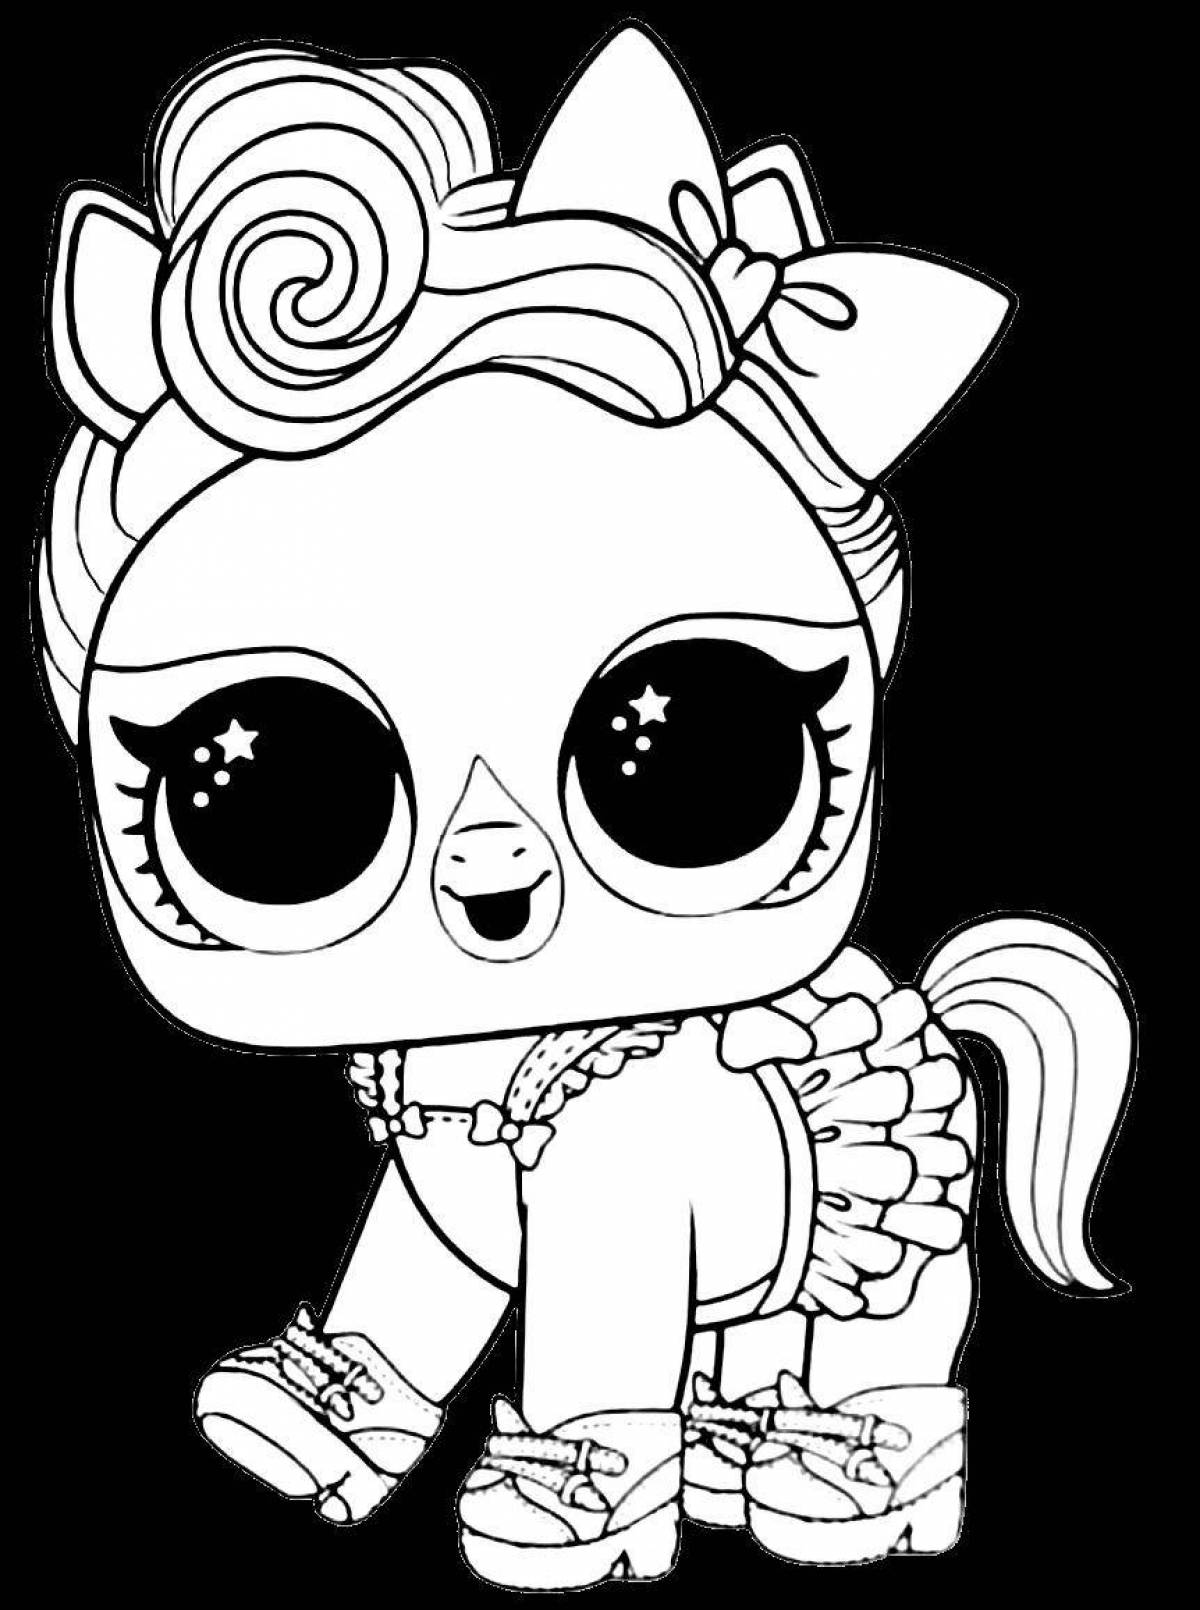 Snuggly coloring page lol cat